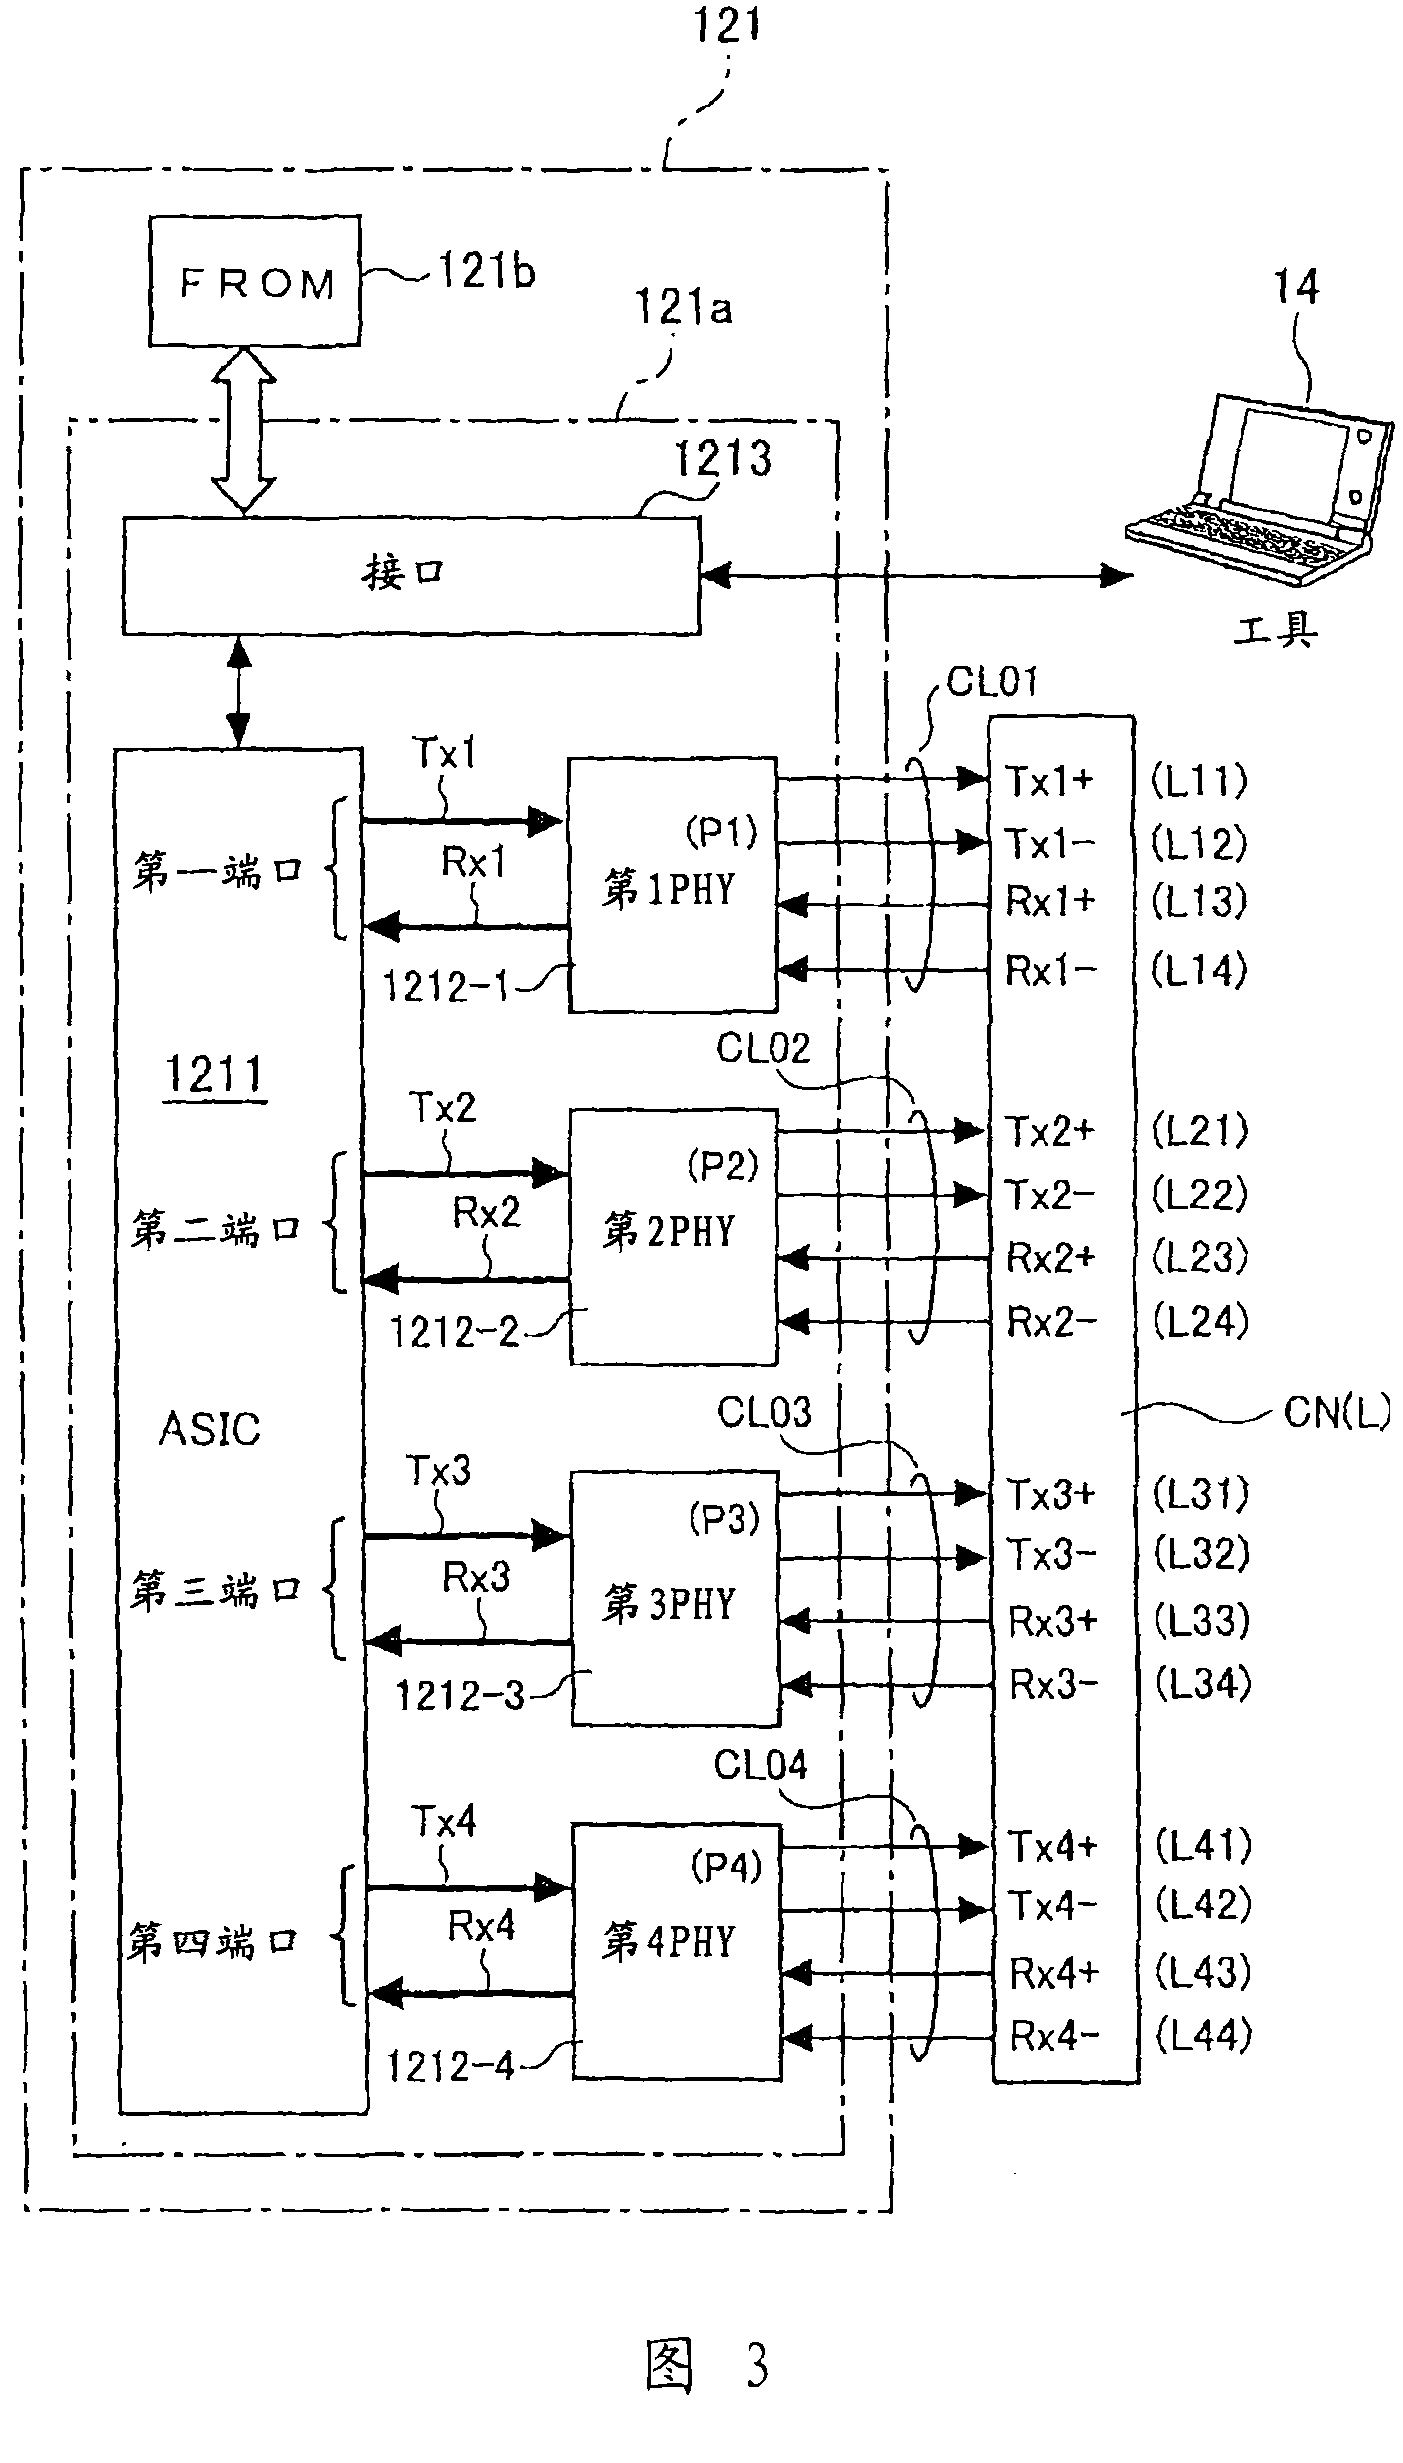 Programmable logic controller with building blocks